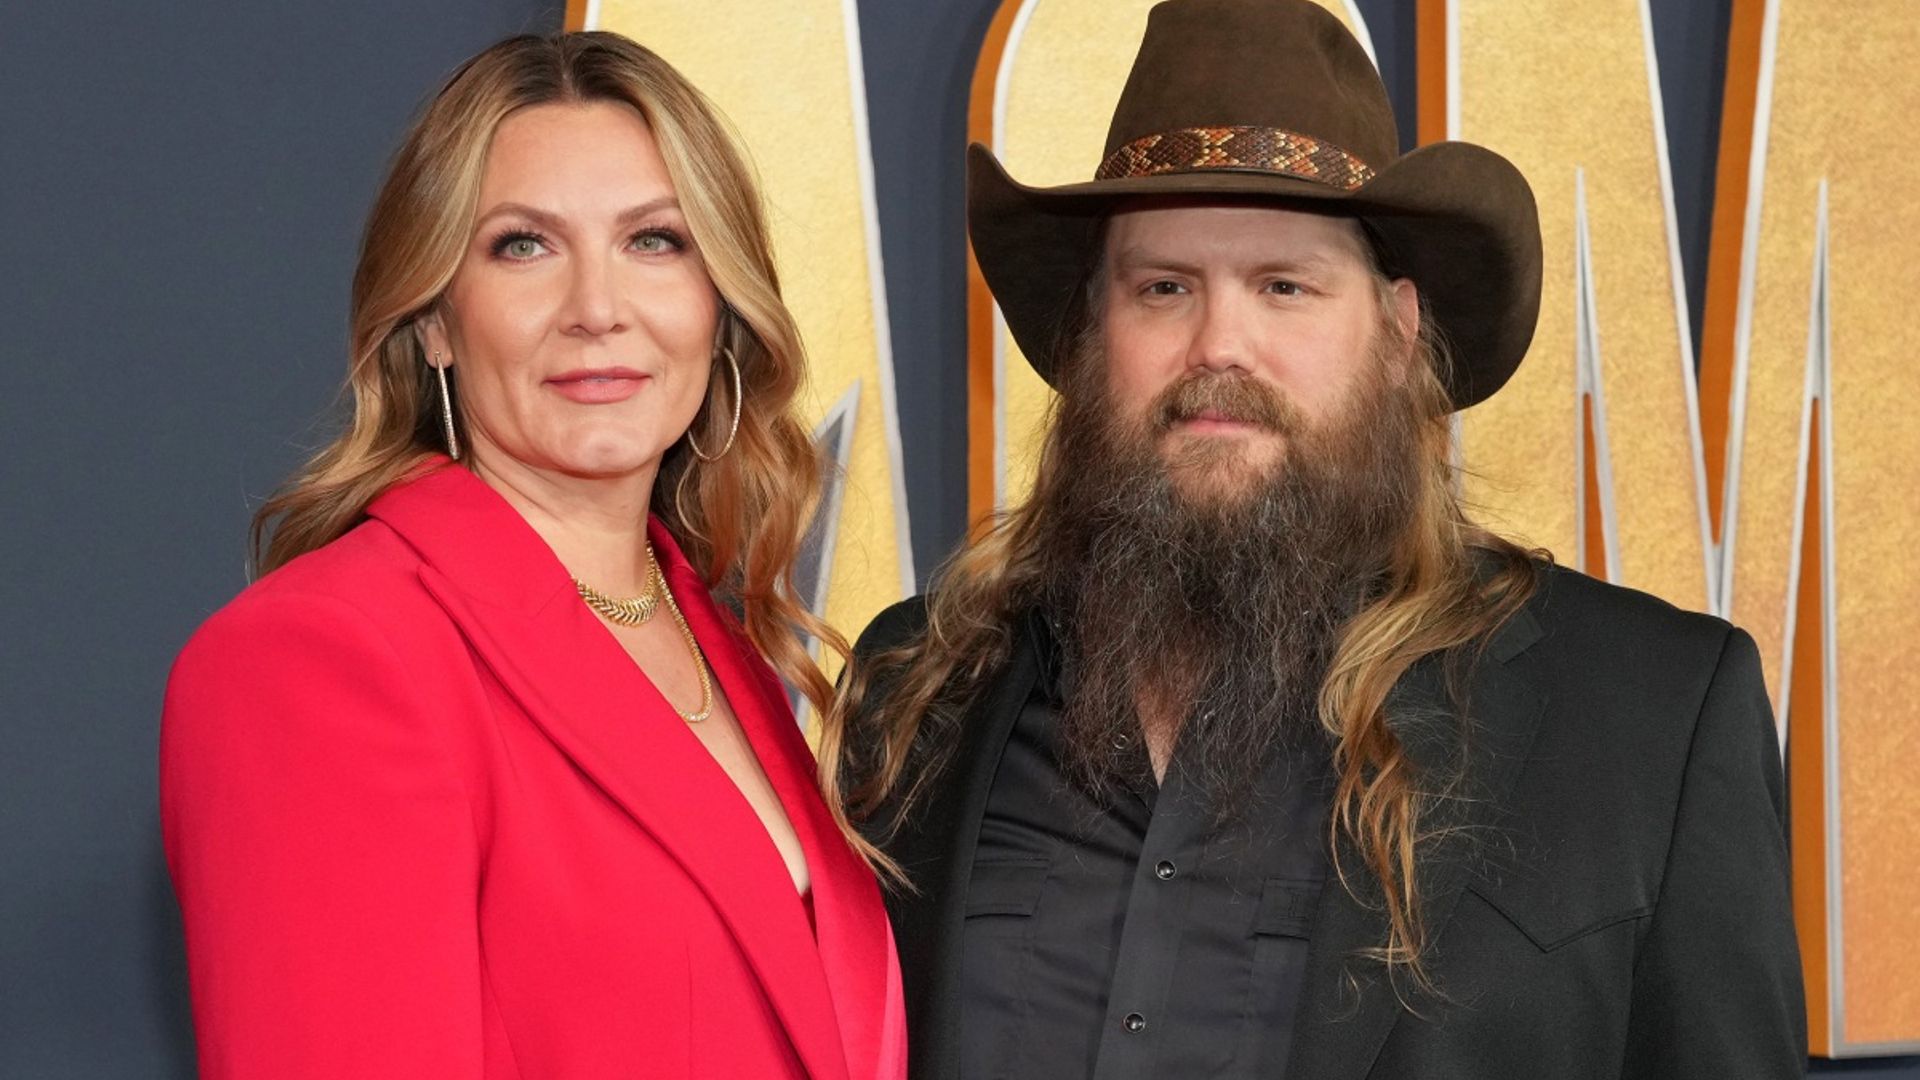 Chris Stapleton and wife leave fans in tears over heartbreaking